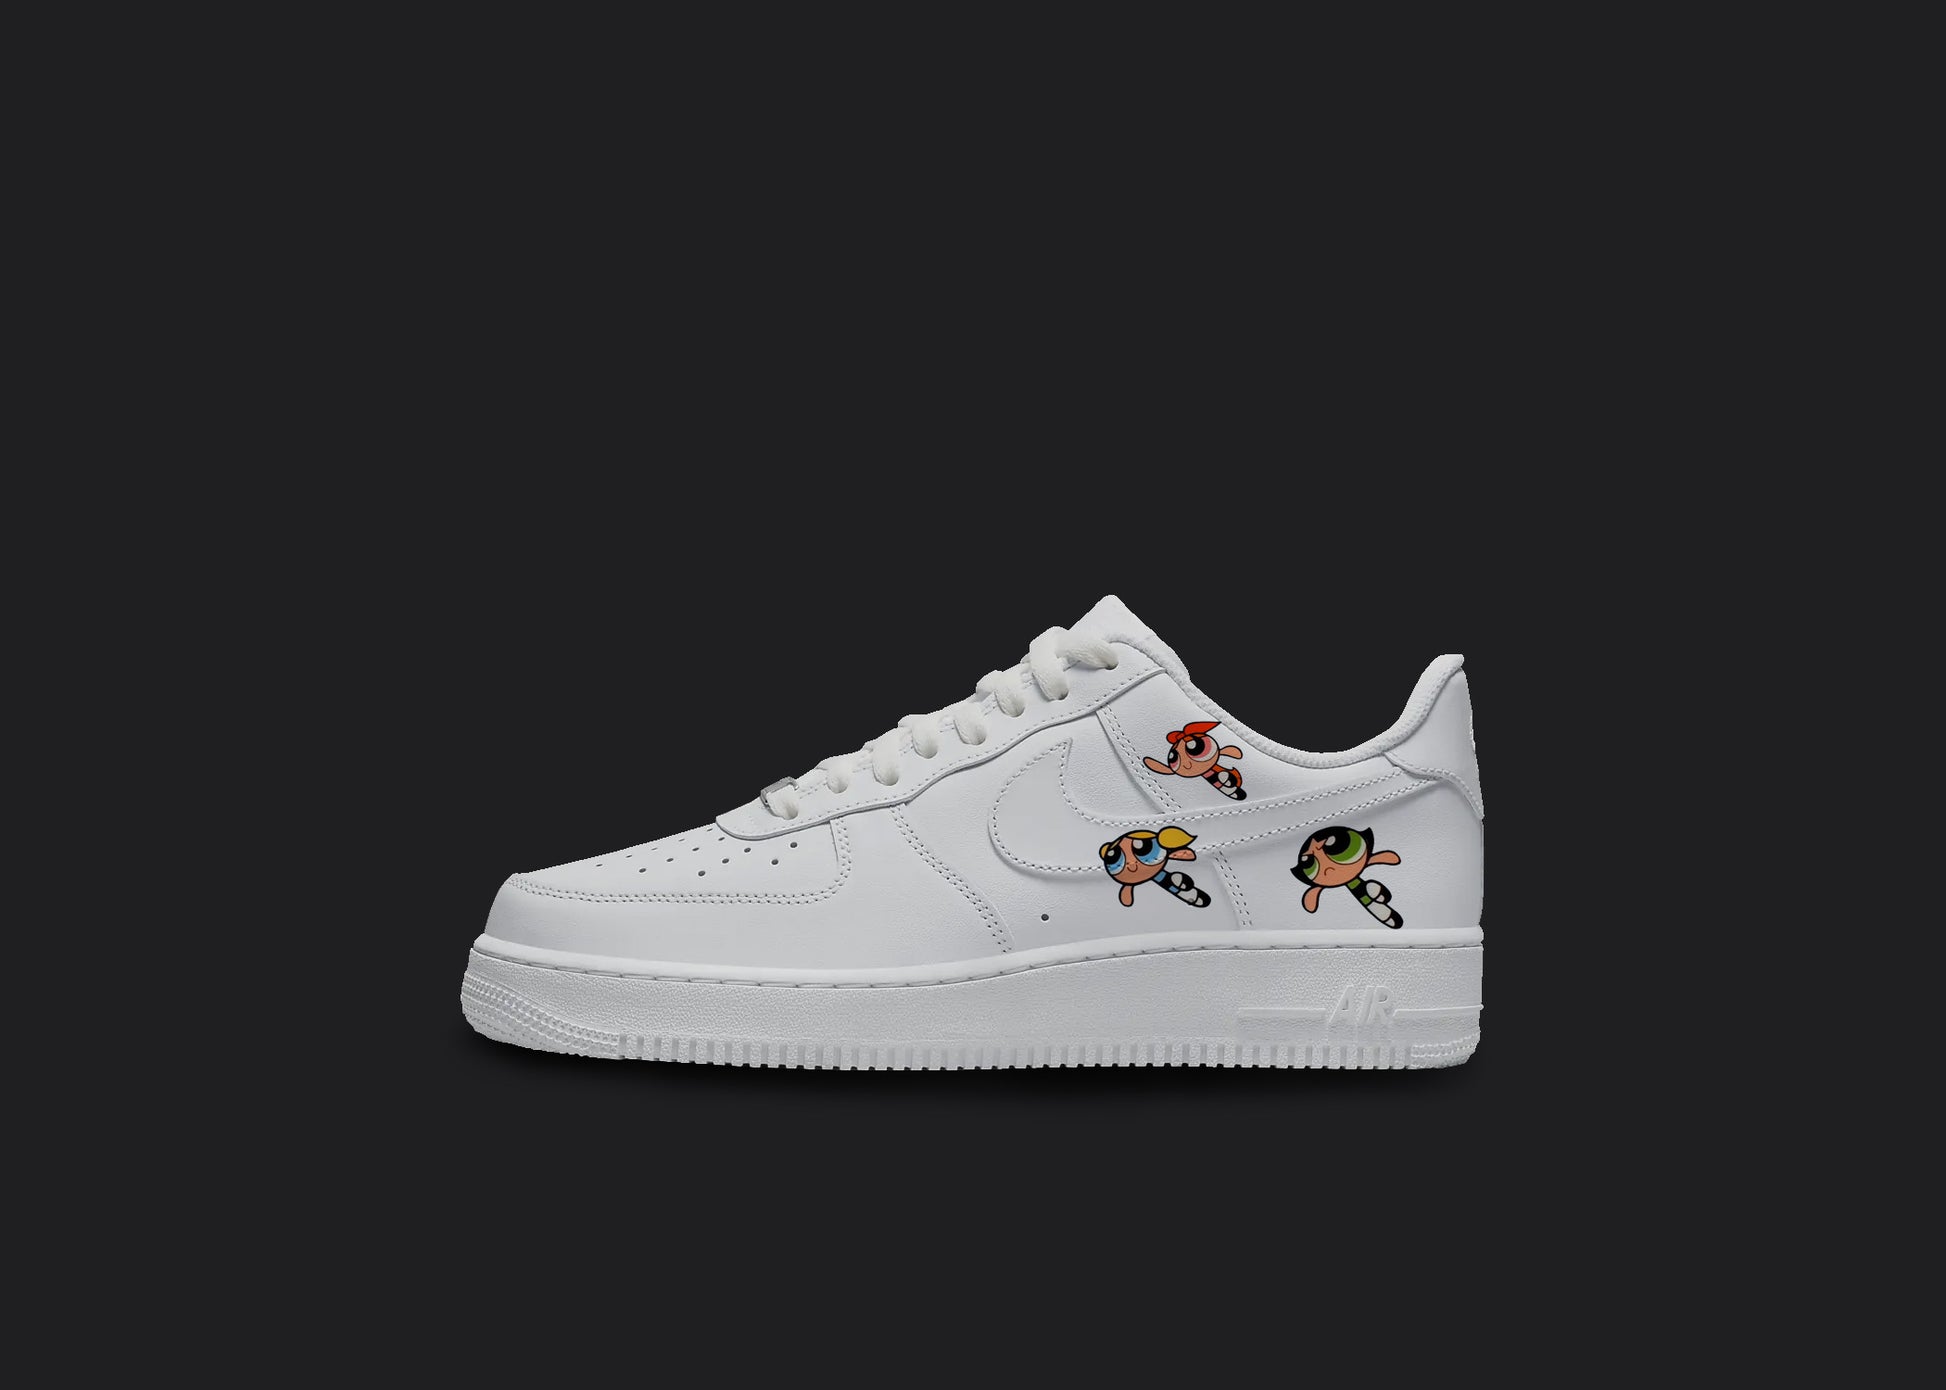 The image is of a Custom Nike Air force 1 sneaker on a blank black background. The white custom nike sneaker has Power Puff girls on the side of the sneaker.